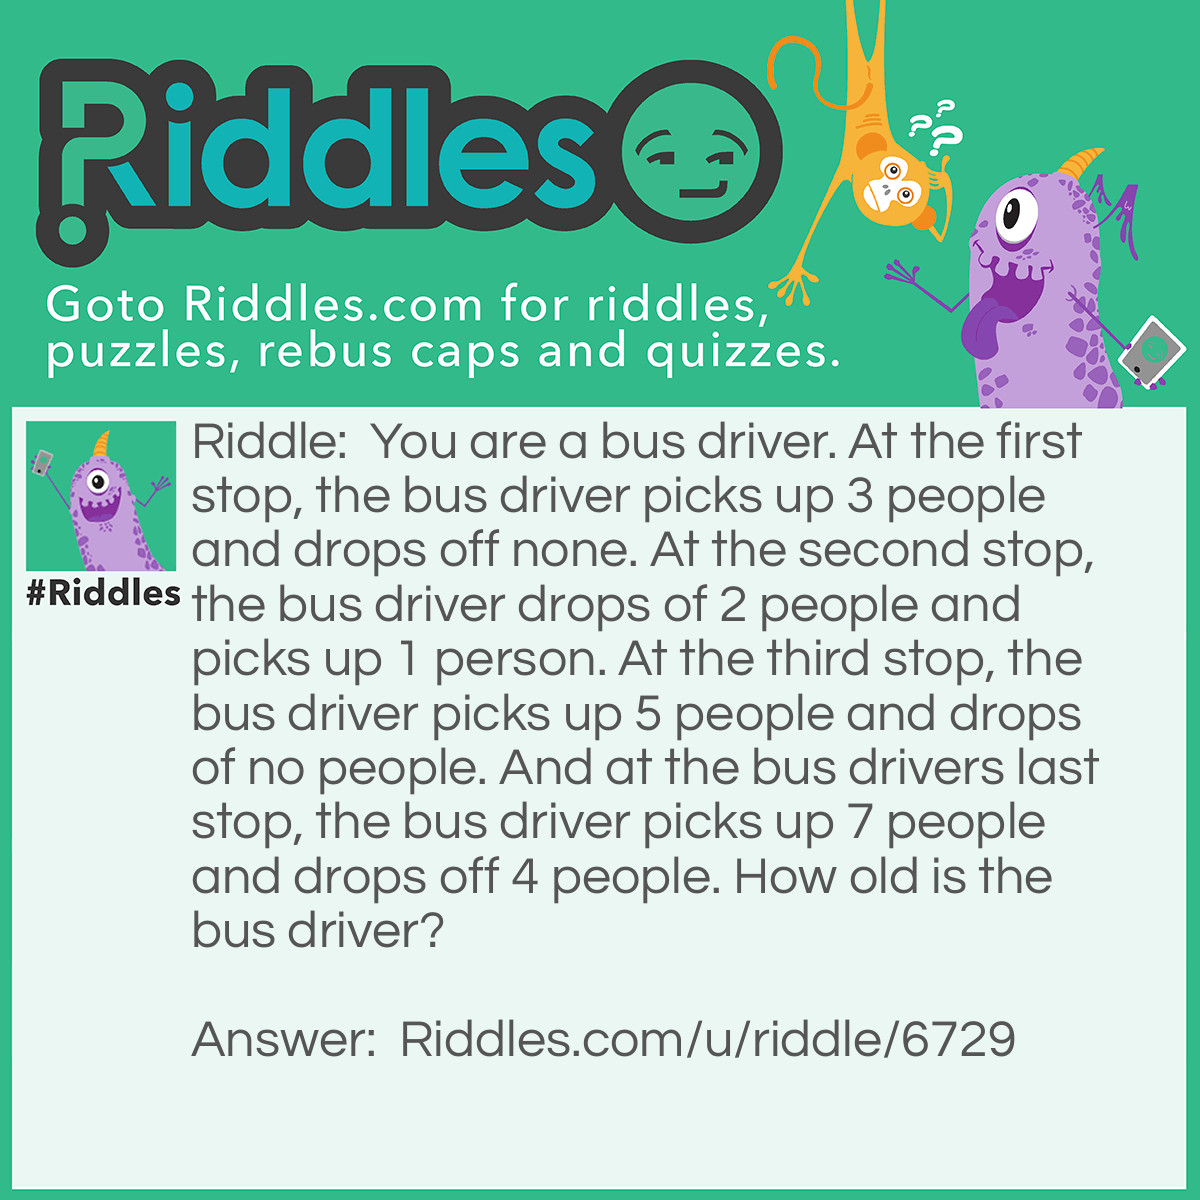 Riddle: You are a bus driver. At the first stop, the bus driver picks up 3 people and drops off none. At the second stop, the bus driver drops of 2 people and picks up 1 person. At the third stop, the bus driver picks up 5 people and drops of no people. And at the bus drivers last stop, the bus driver picks up 7 people and drops off 4 people. How old is the bus driver? Answer: YOU ARE THE BUS DRIVER, however old you are, that is how old the bus diver is!!!